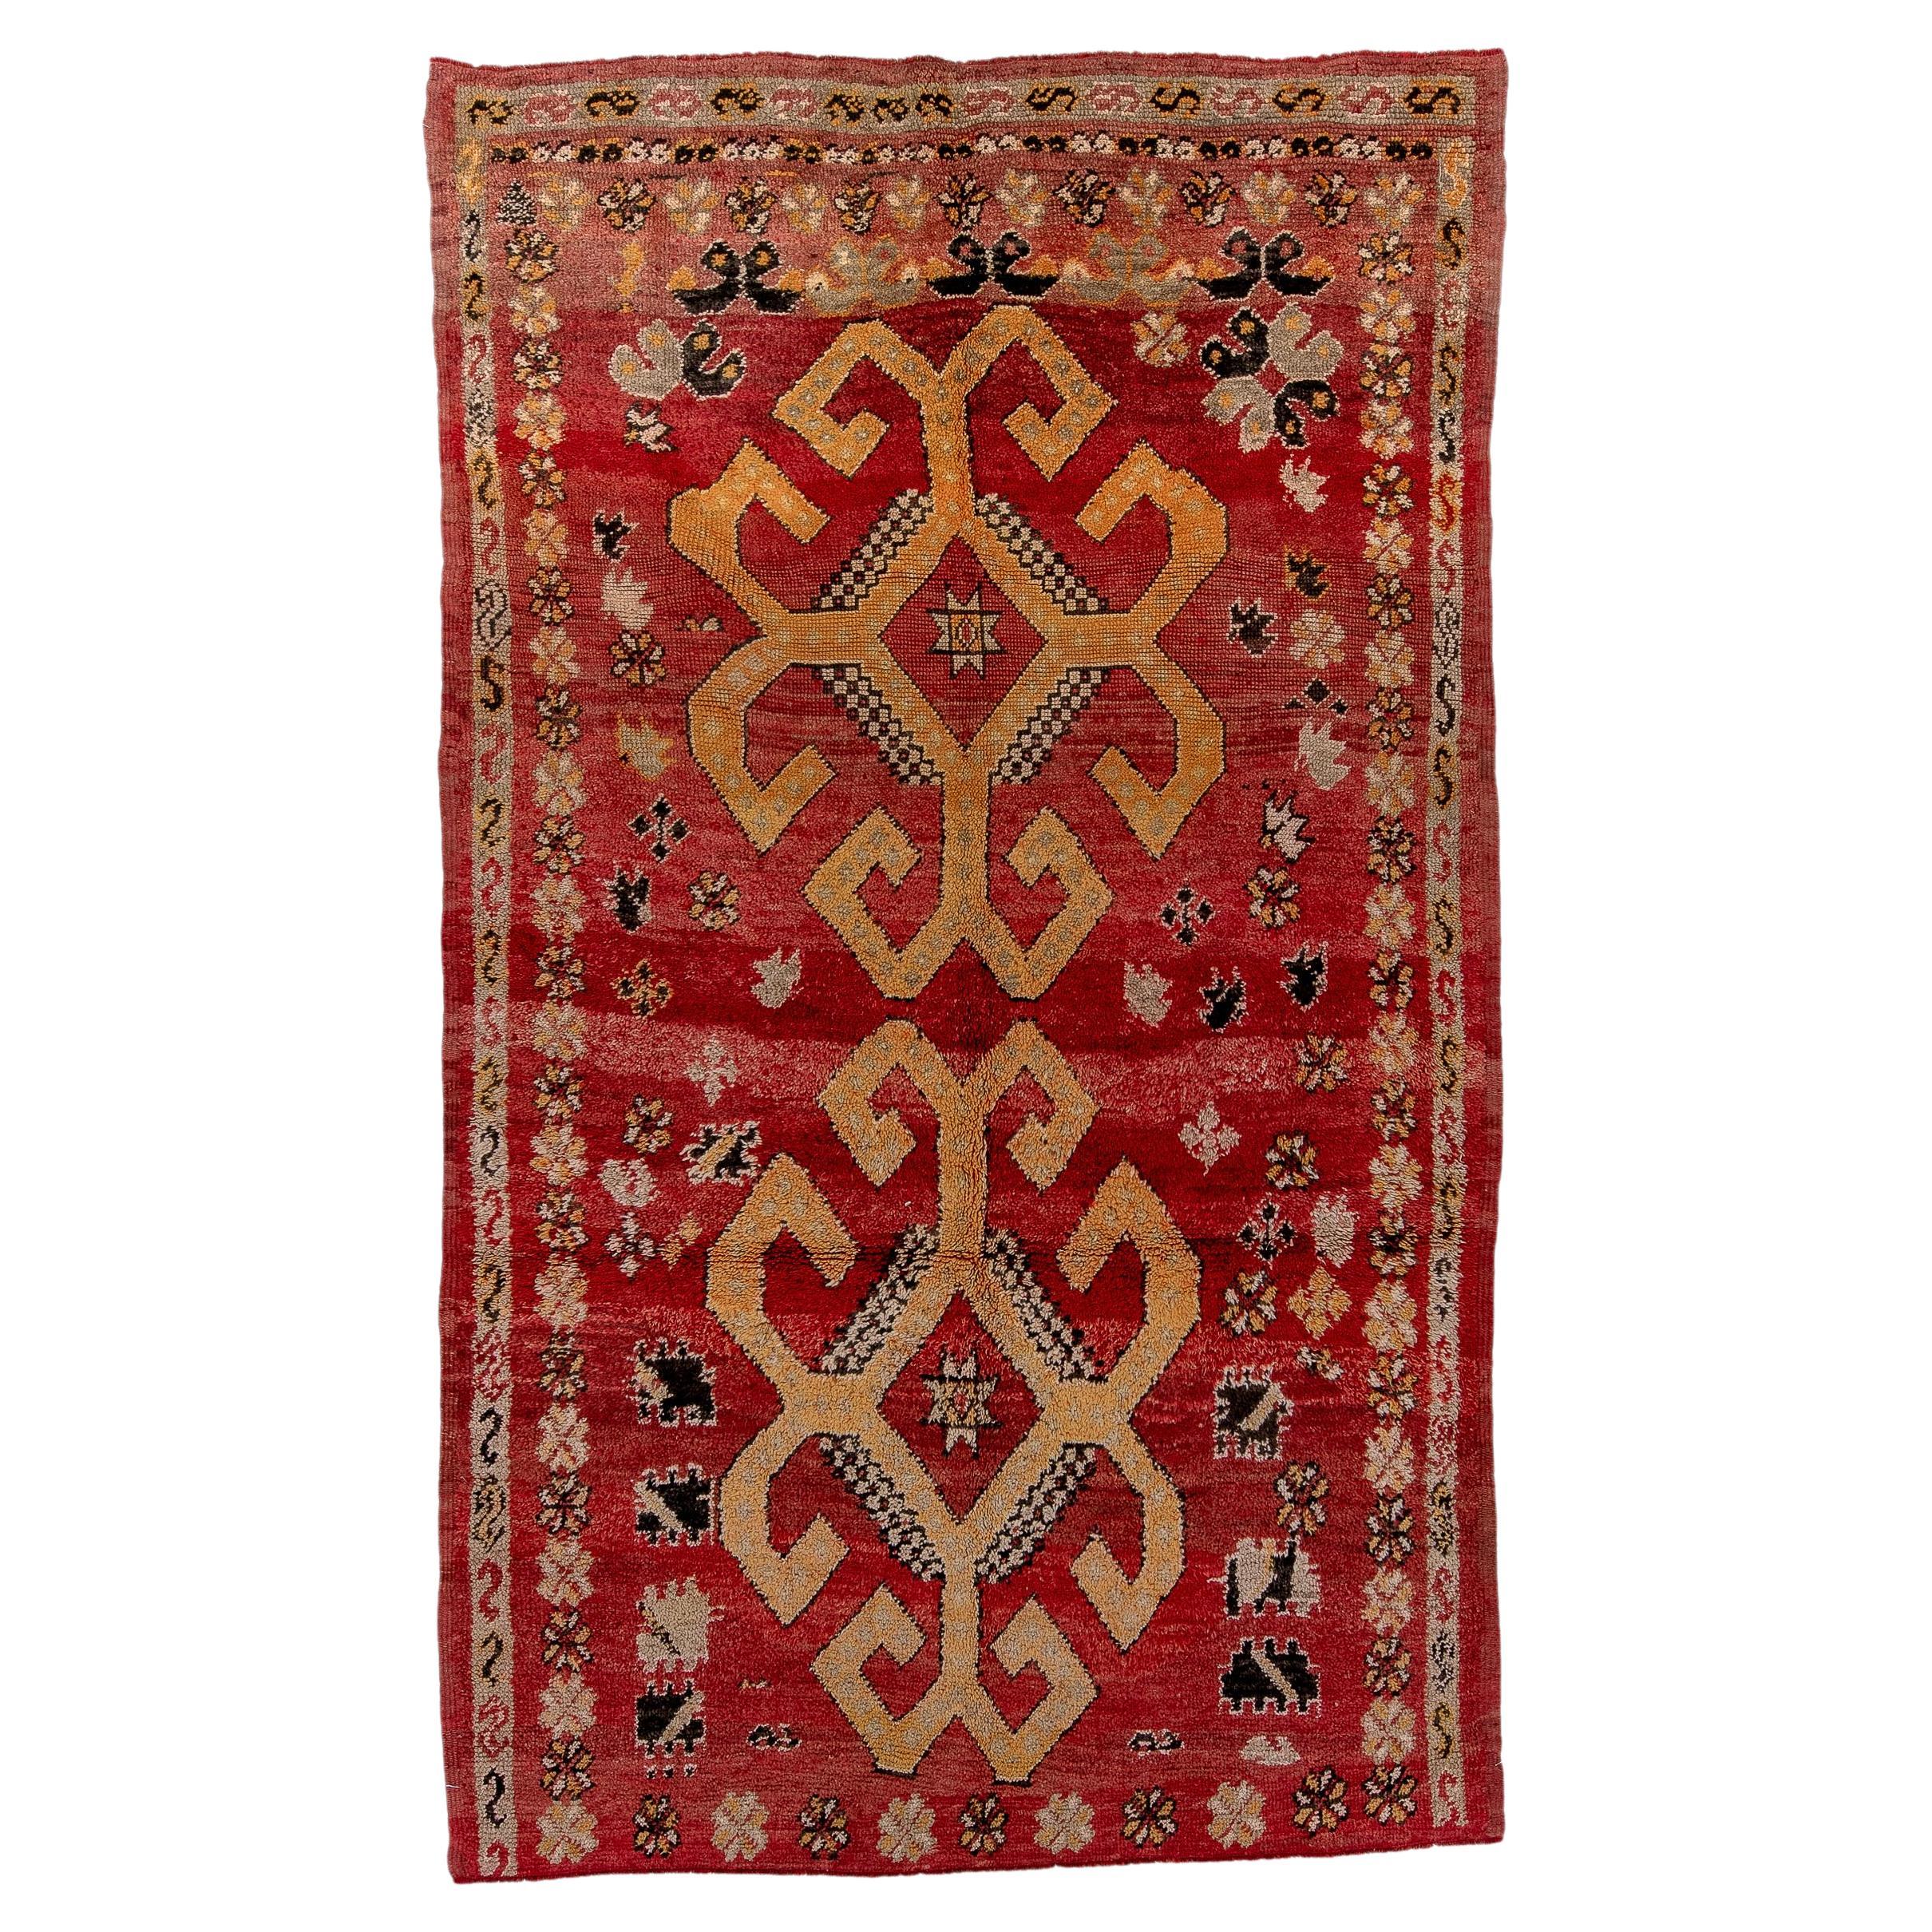 Double Medallion Moroccan Rug with Floral Geometric Motifs - Deep Red Old Gold For Sale